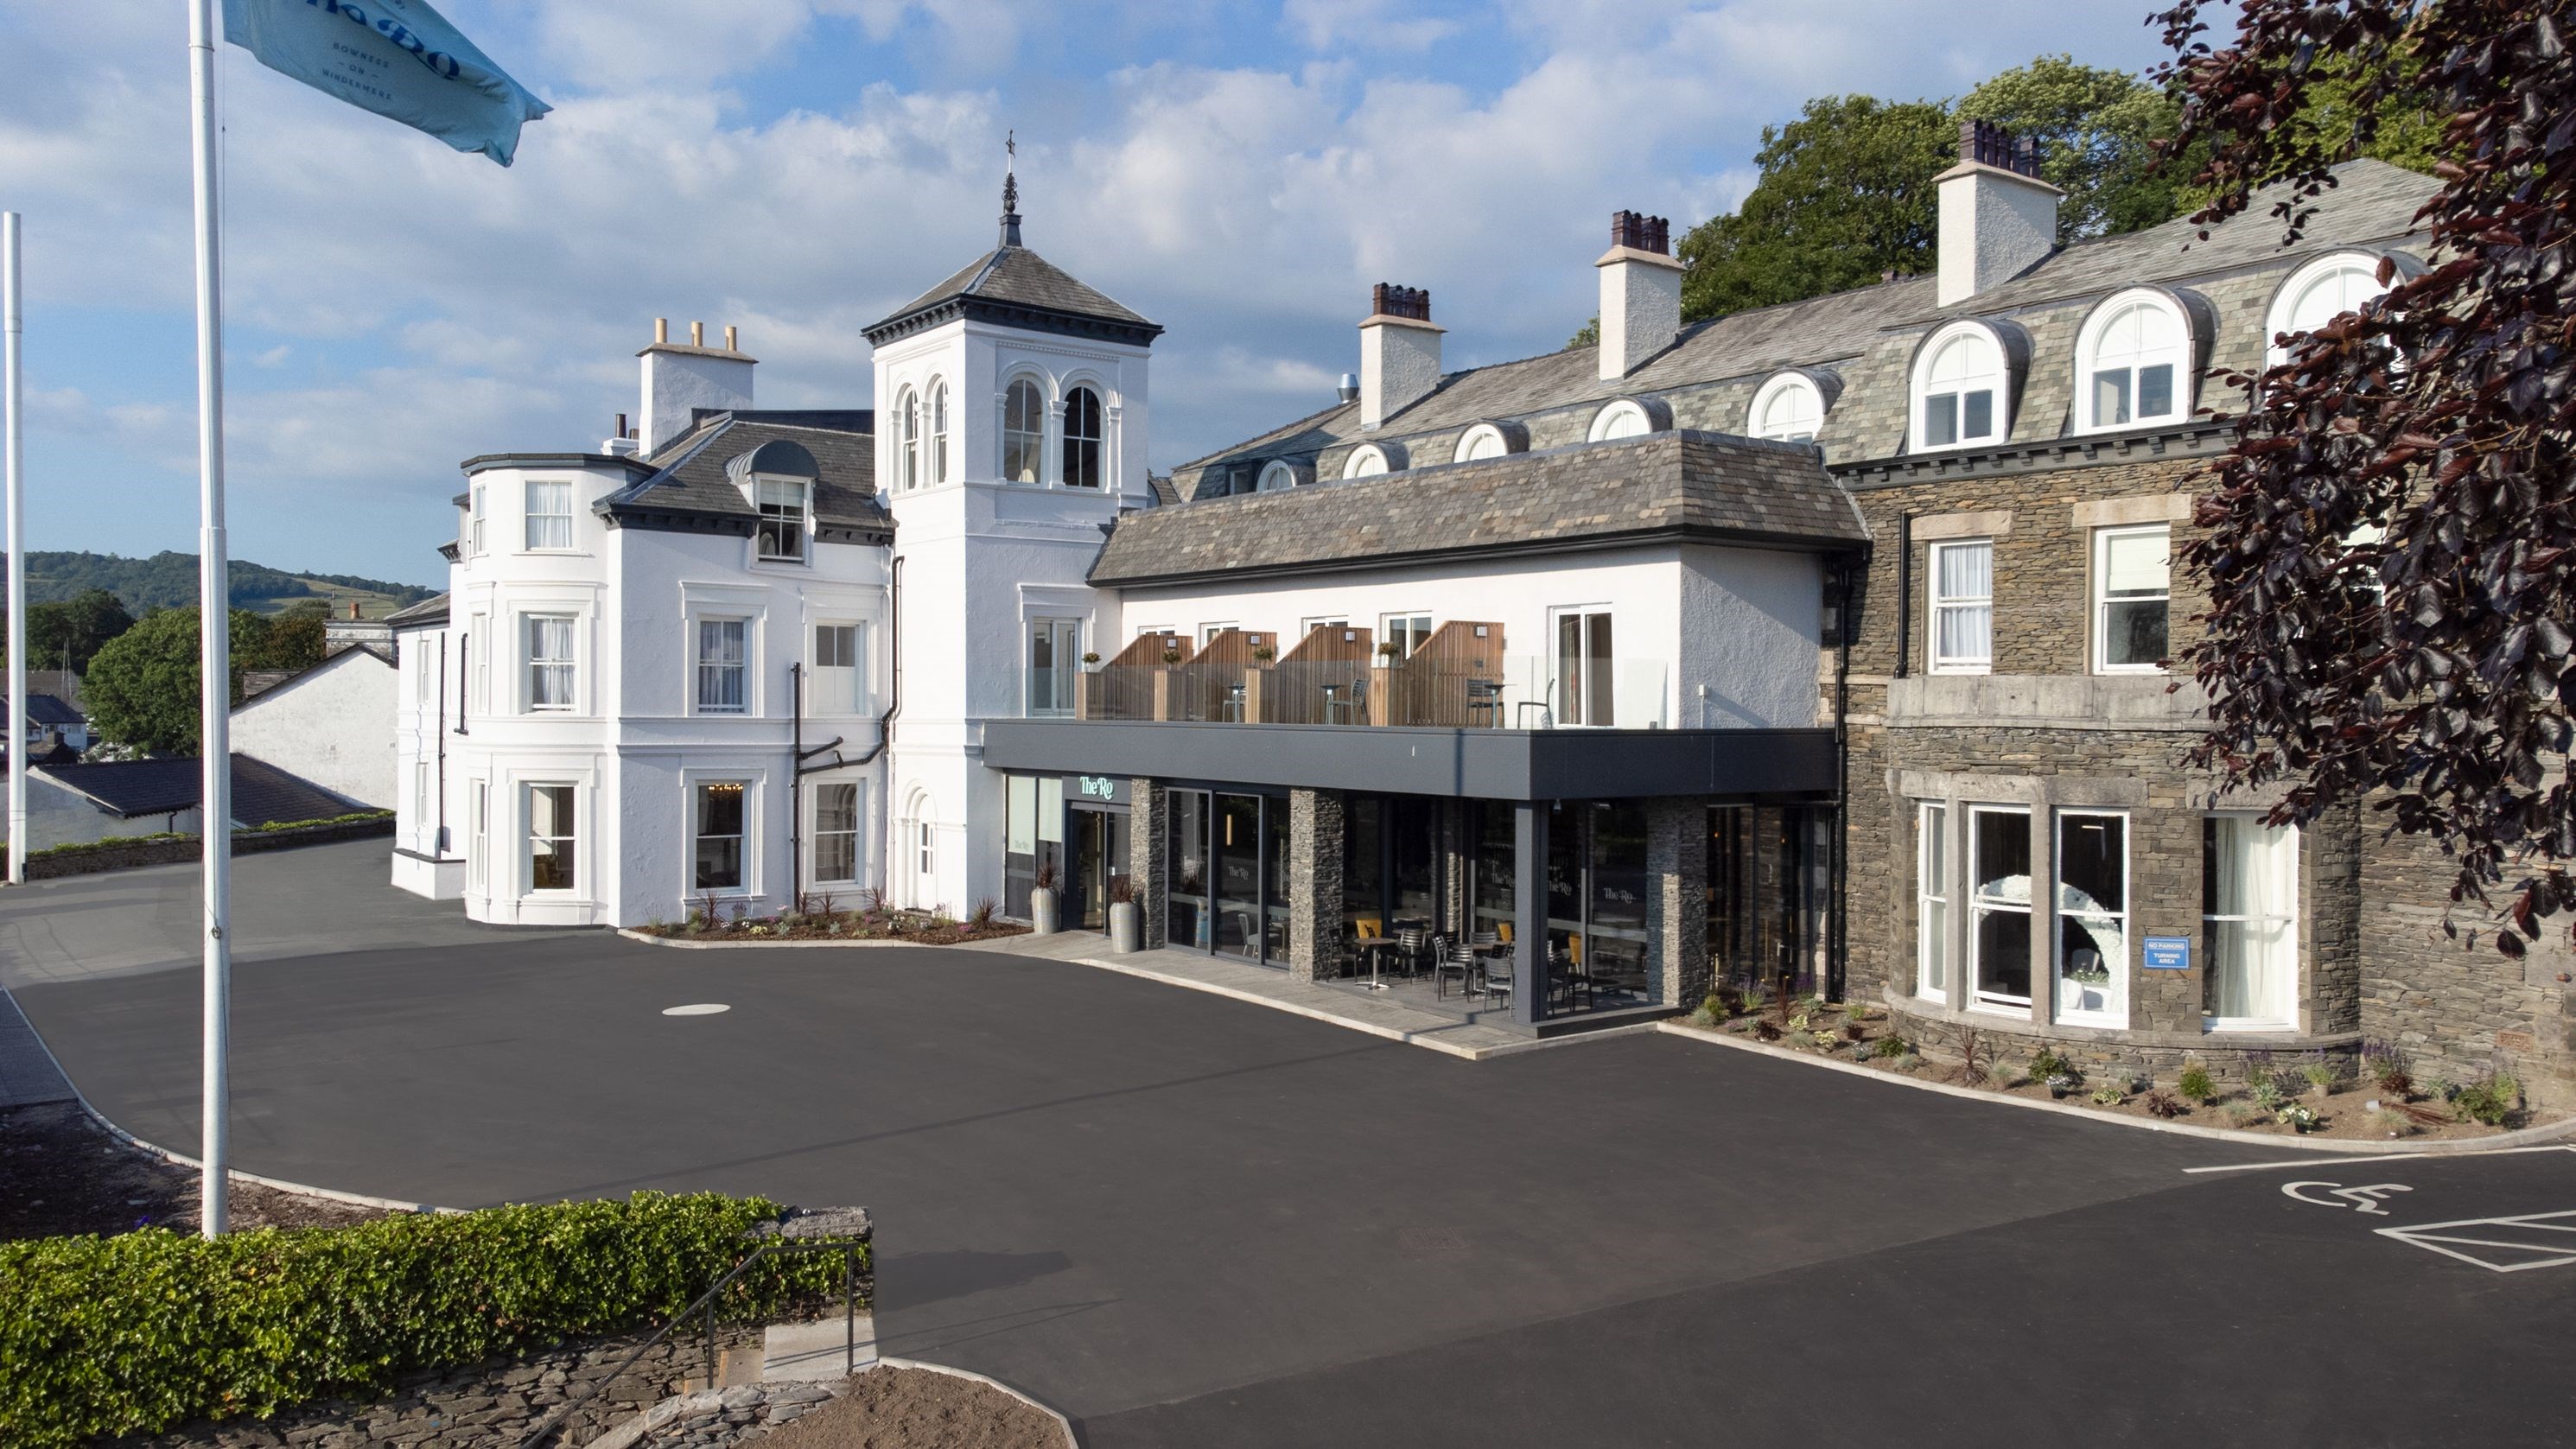 The Ro Hotel, Windermere